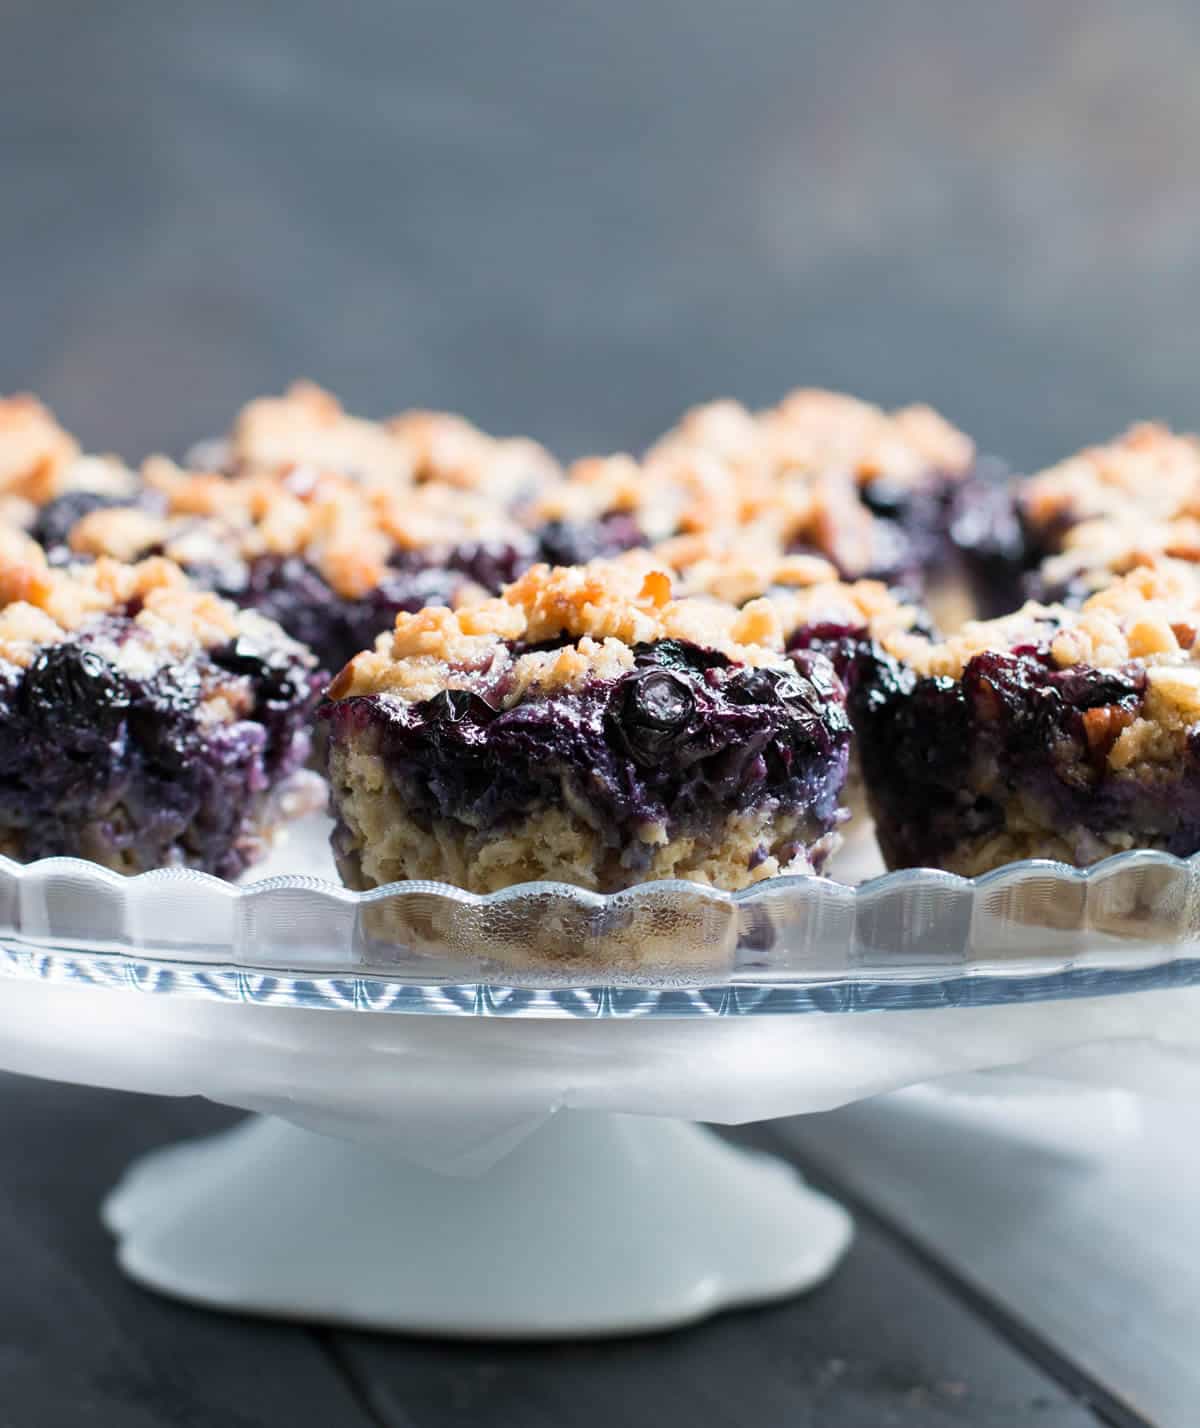 Blueberry Pie Baked Oatmeal. A pile of fresh blueberries and buttery crumb topping create a delicious fruity pie layer on top of hearty baked oatmeal.